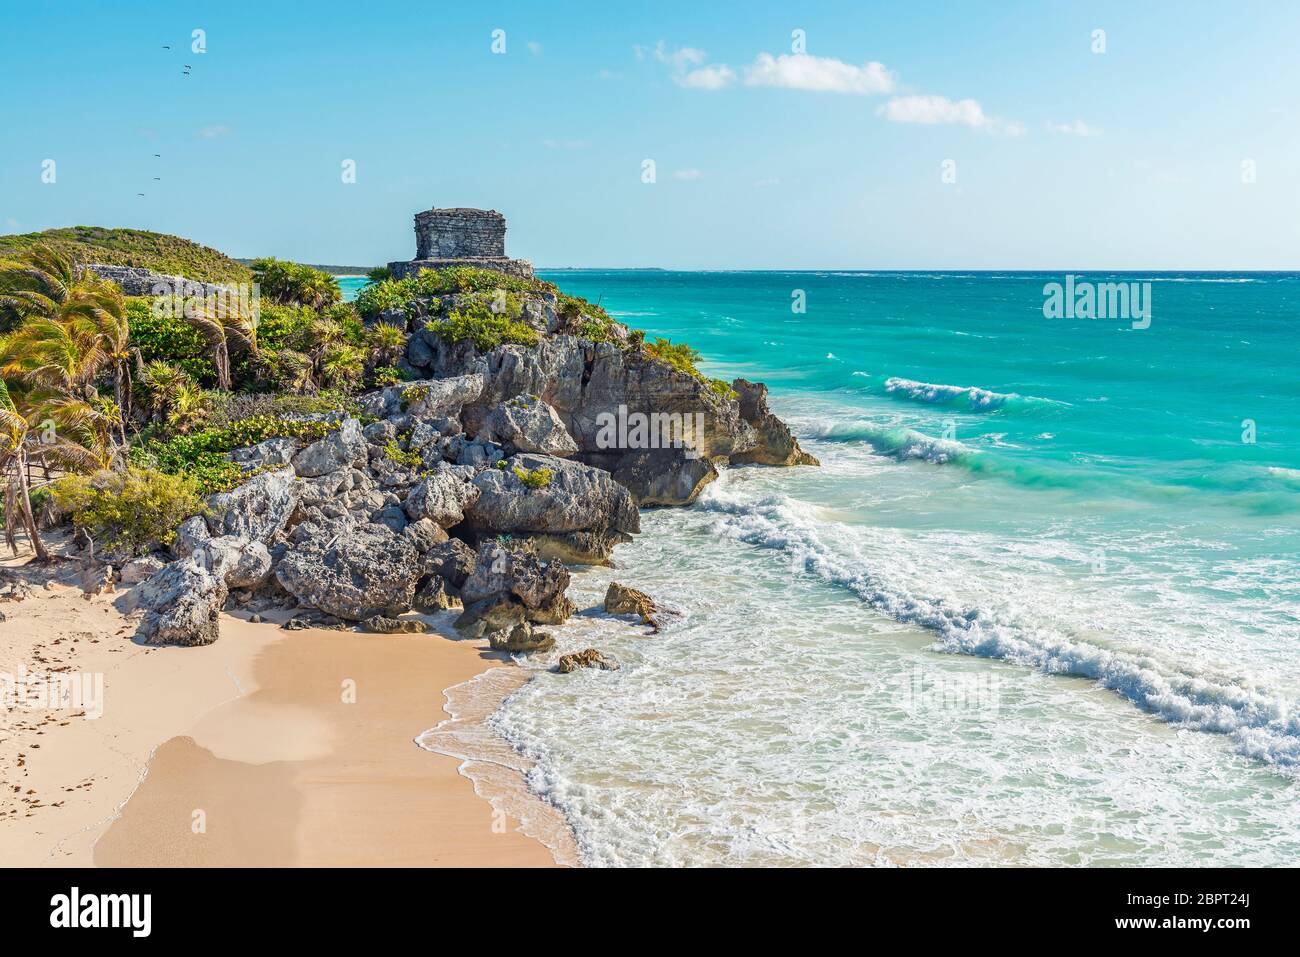 The Mayan Ruins of Tulum and its beach by the Caribbean Sea, Quintana Roo state, Yucatan Peninsula, Mexico. Stock Photo